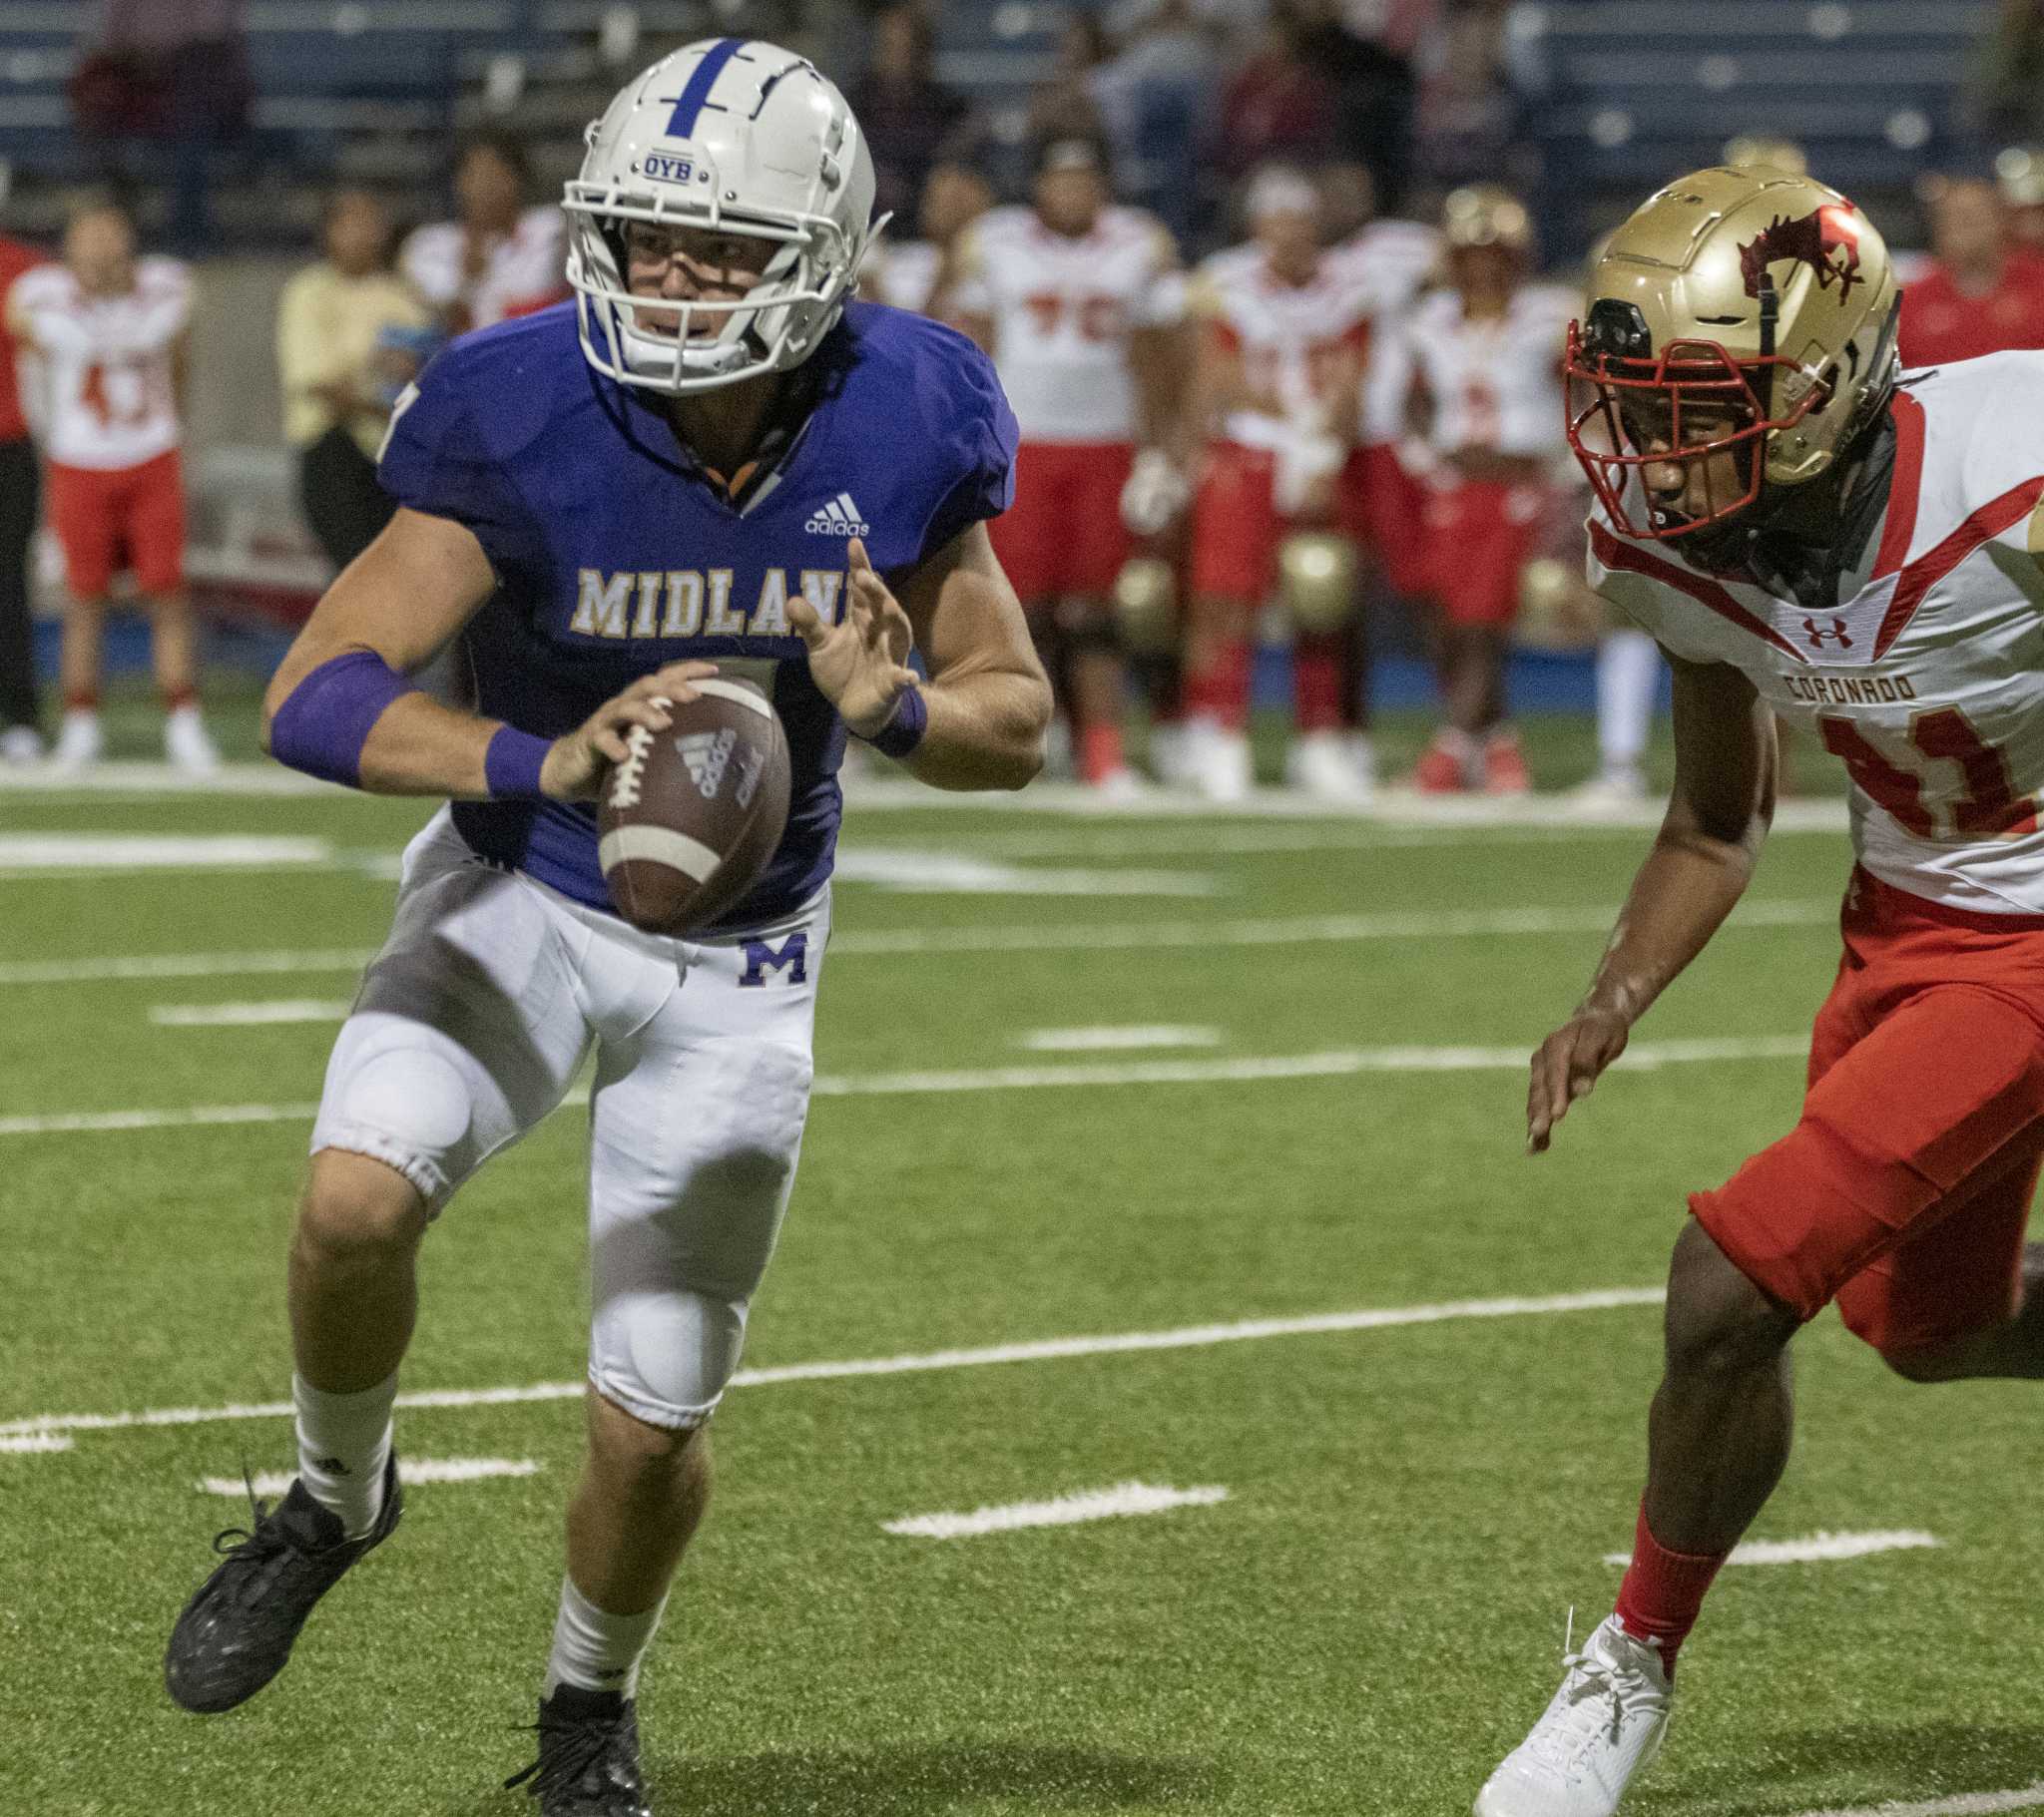 Statewide Texas high school football scores